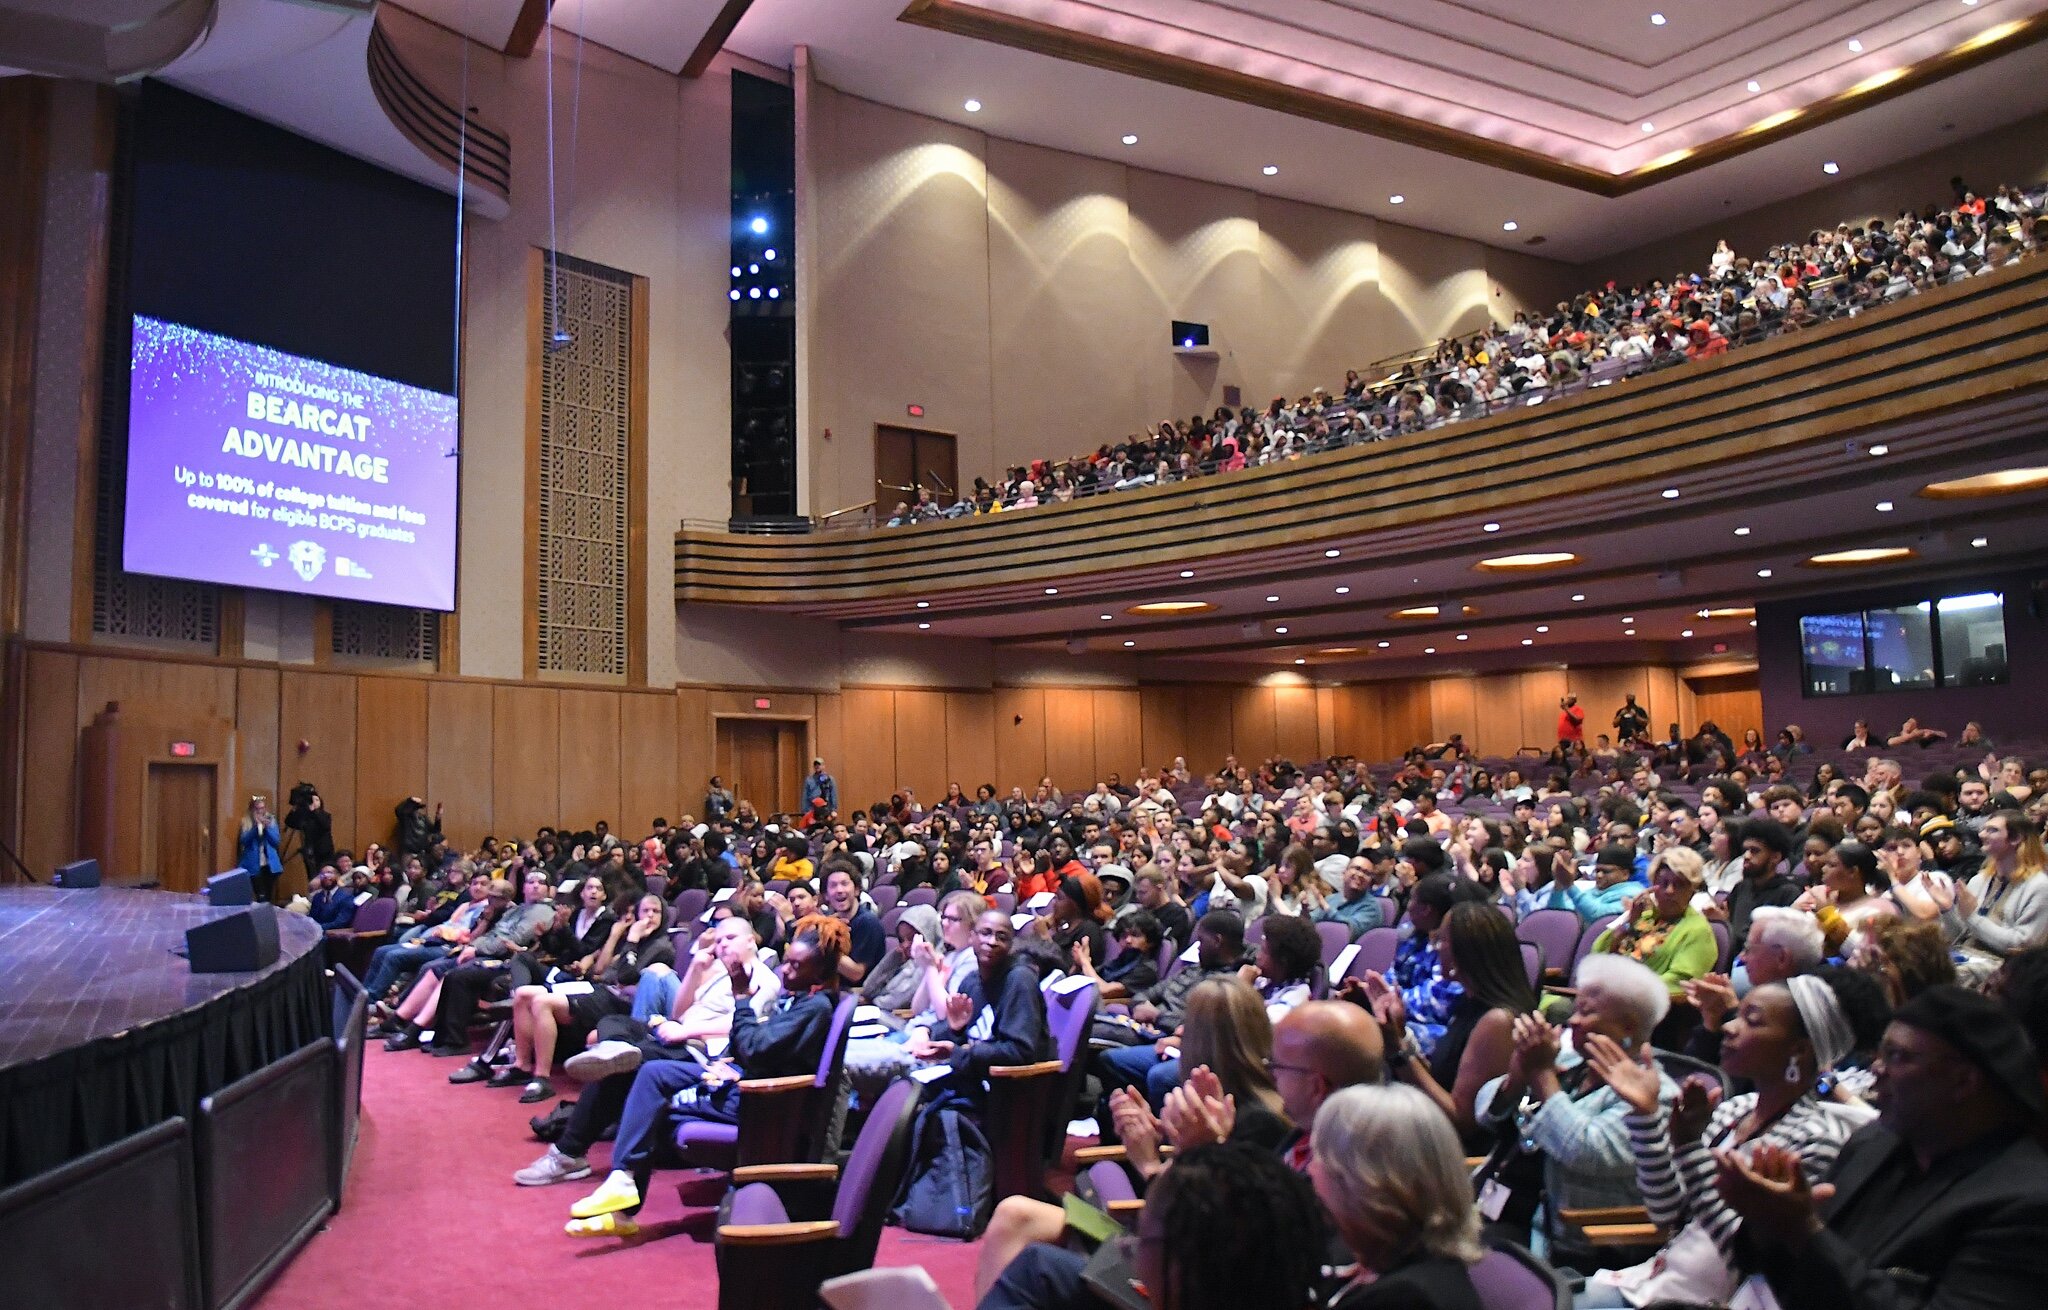 About 1,200-1,500 students, teachers, parents, administrators, board members, and others attended the announcement of the Bearcat Advantage at W.K. Kellogg Auditorium.